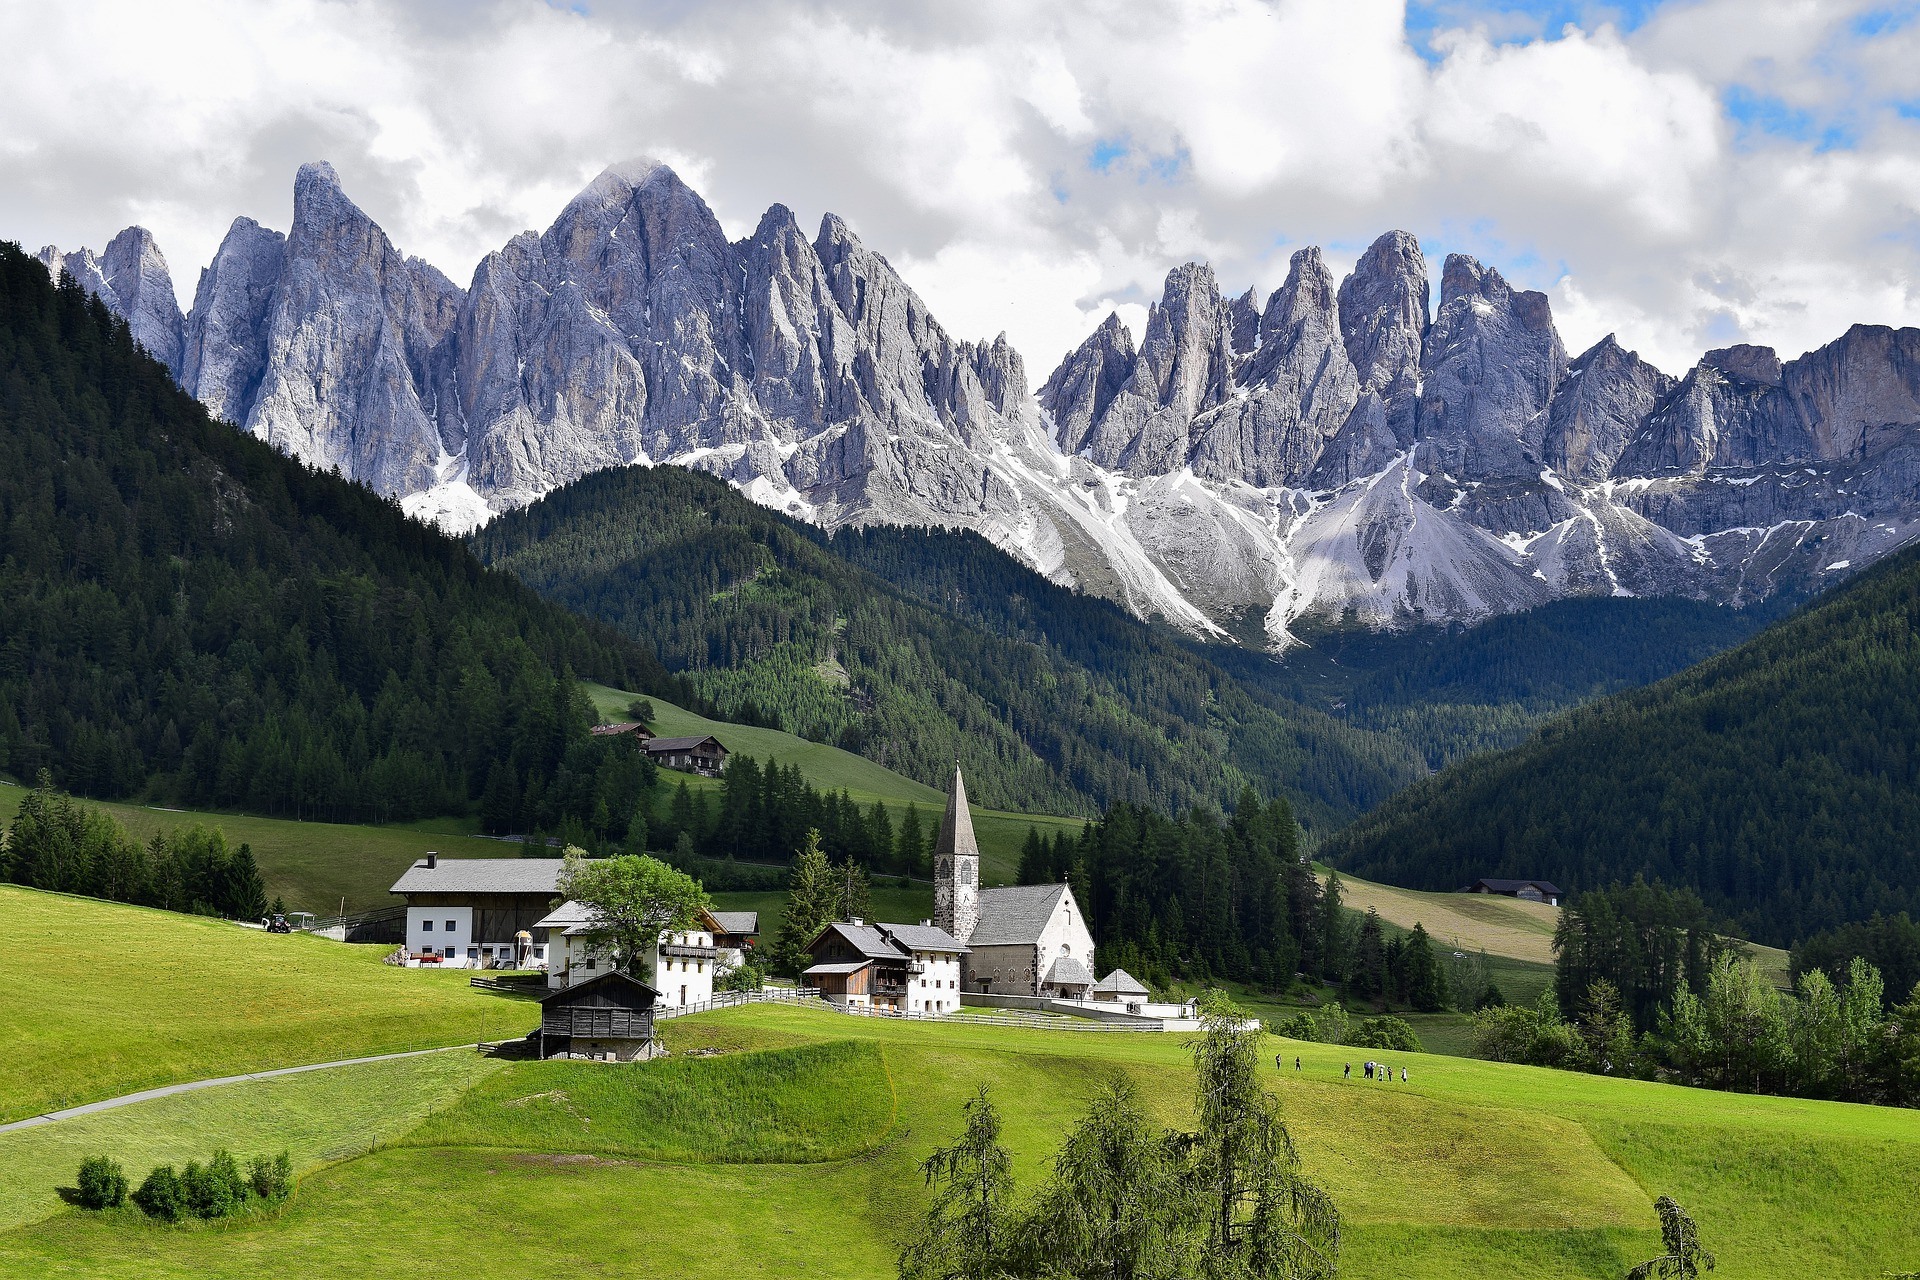 Where to Stay in Italy for Adventure The Dolomites